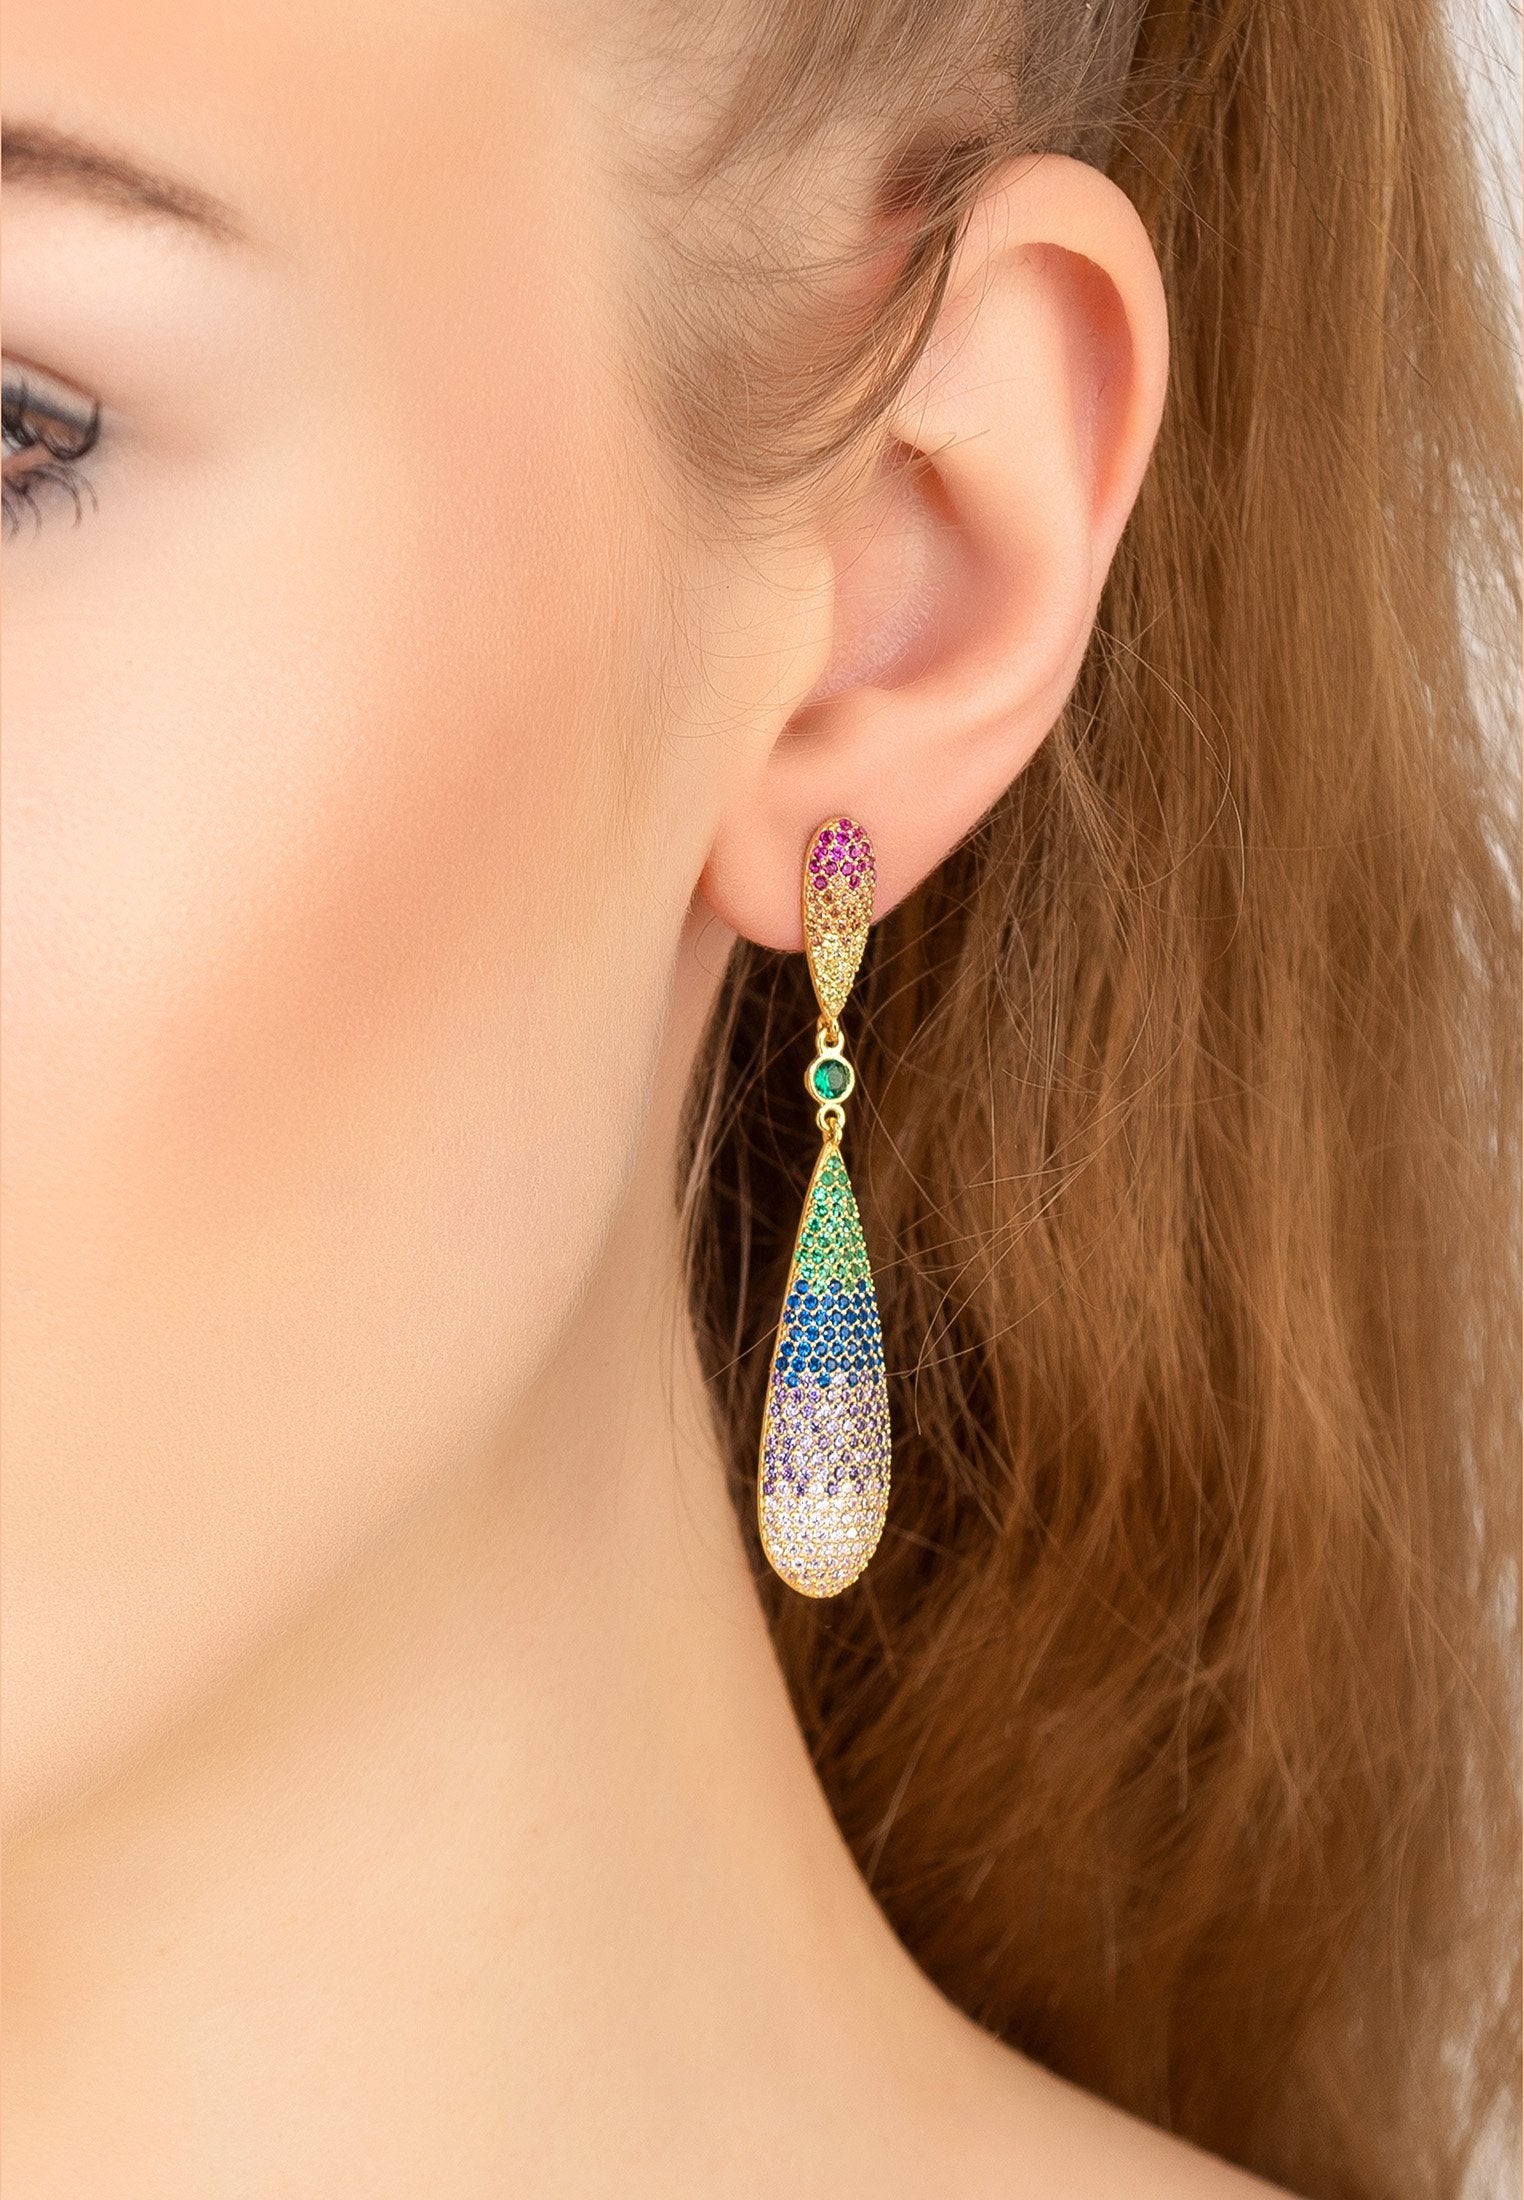 Rainbow Gold Long Drop Earrings with Multi-Coloured Zirconia in Sterling Silver - Jewelry & Watches - Bijou Her -  -  - 